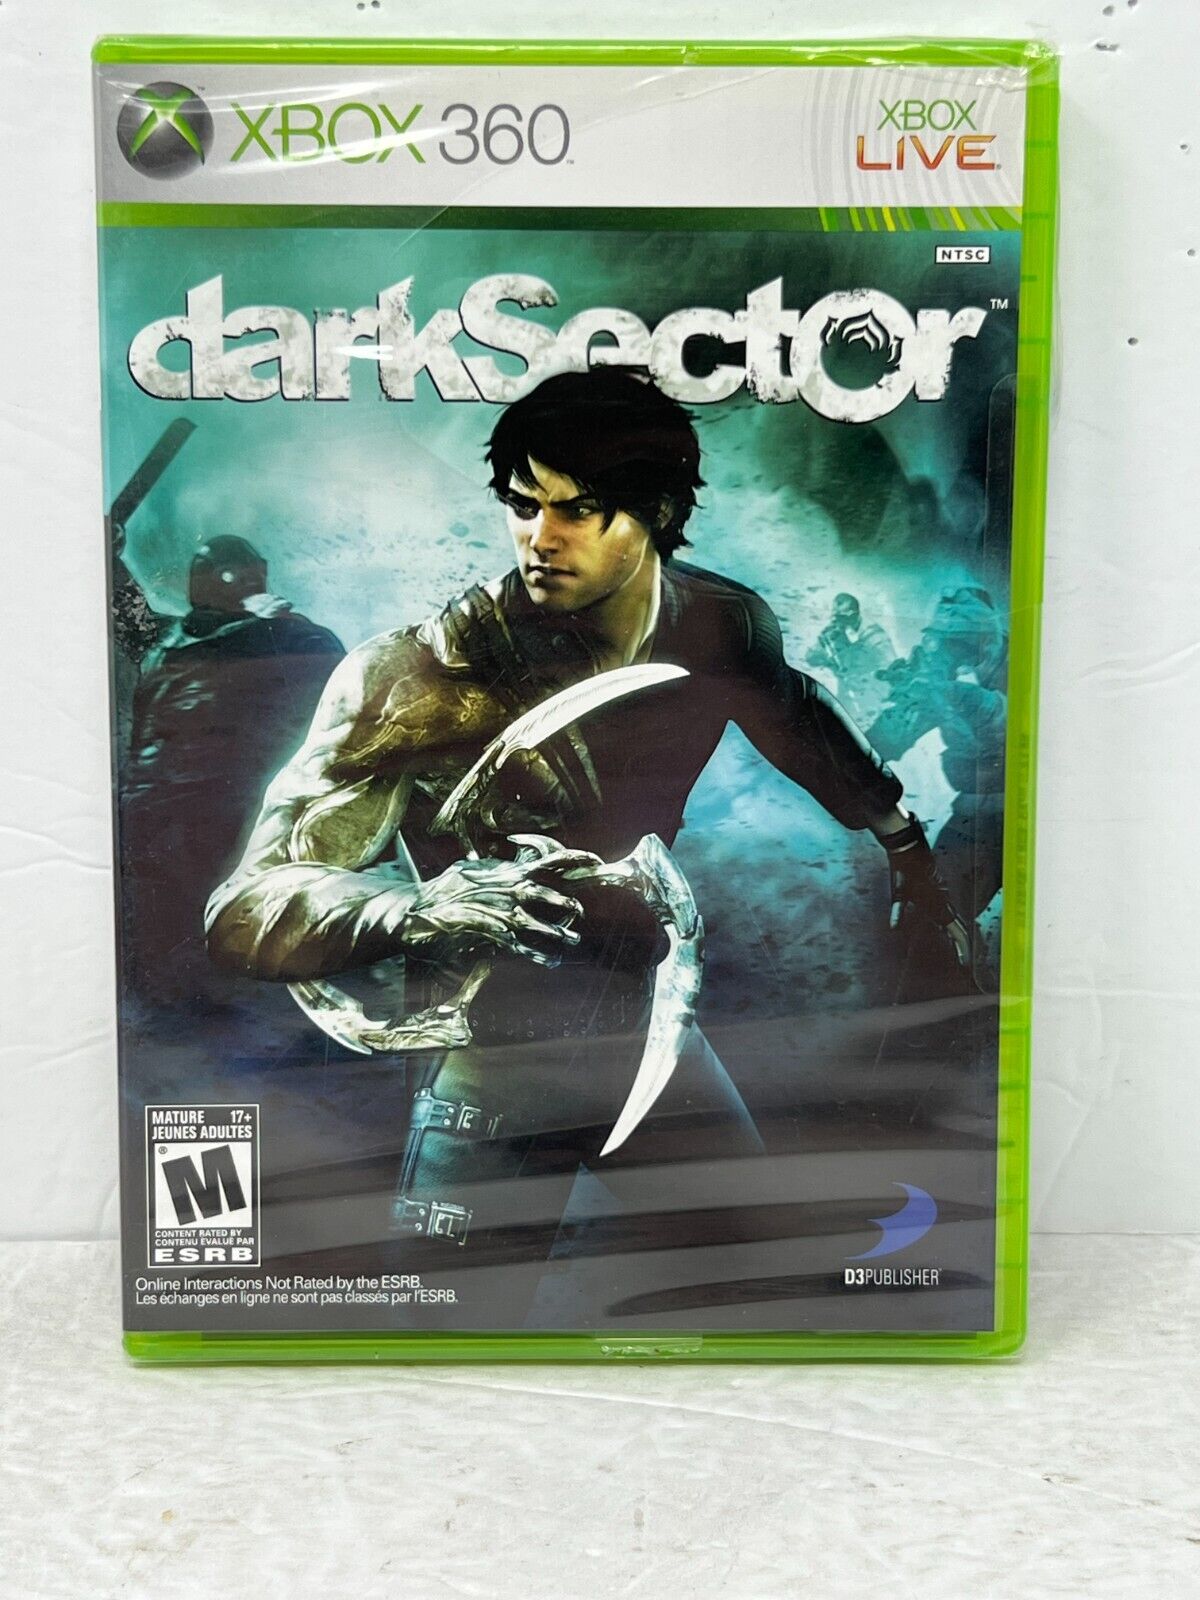 Xbox 360 Dark Sector Video Game New and Sealed!! Has Torn Missing Shinkwrap